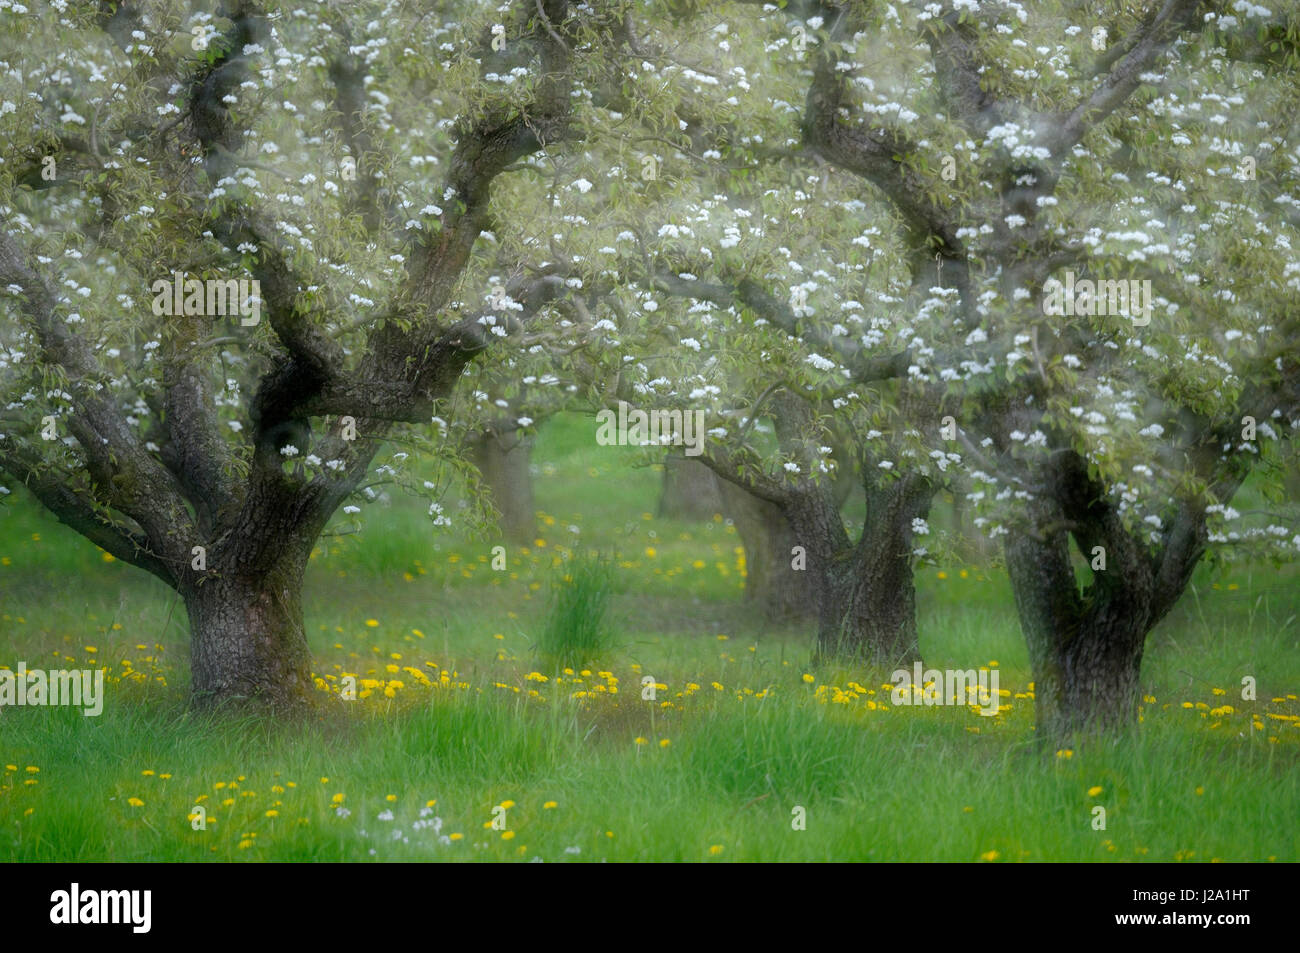 Soft-focus image of an old Pear orchard in blossom Stock Photo